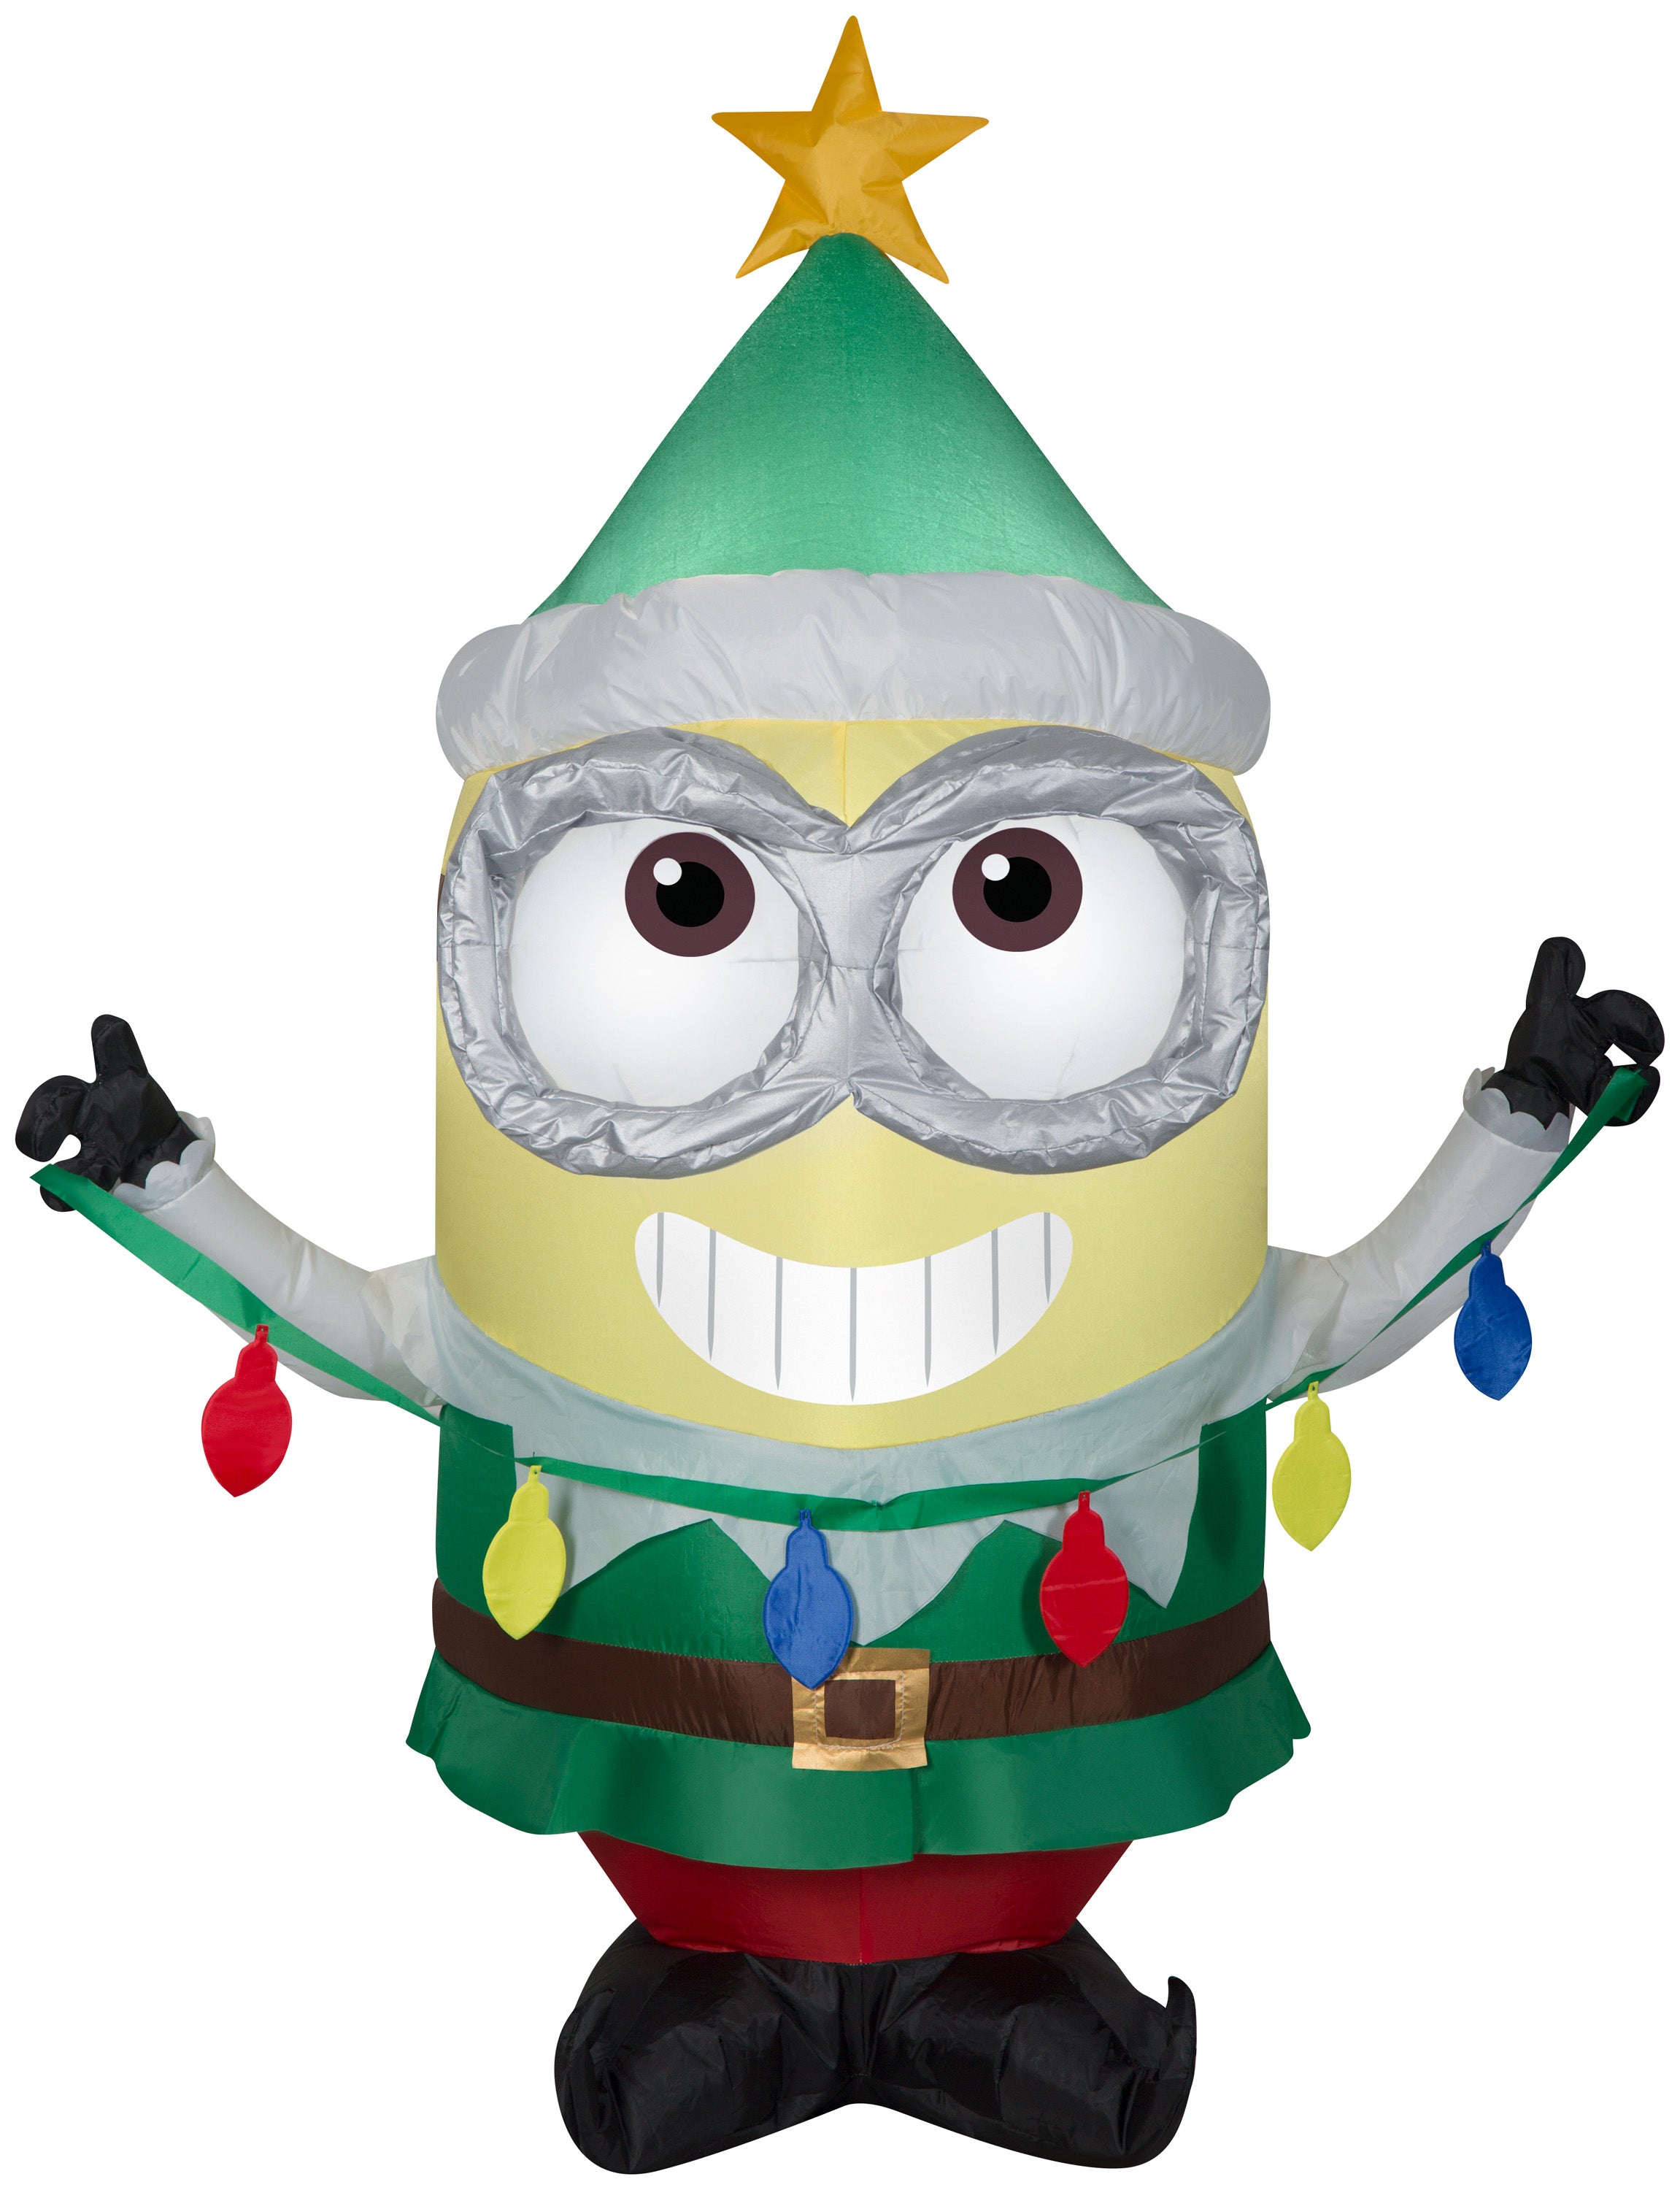 Gemmy Christmas Airblown Inflatable Inflatable Minion Dave with Light String, 3.5 ft Tall, yellow